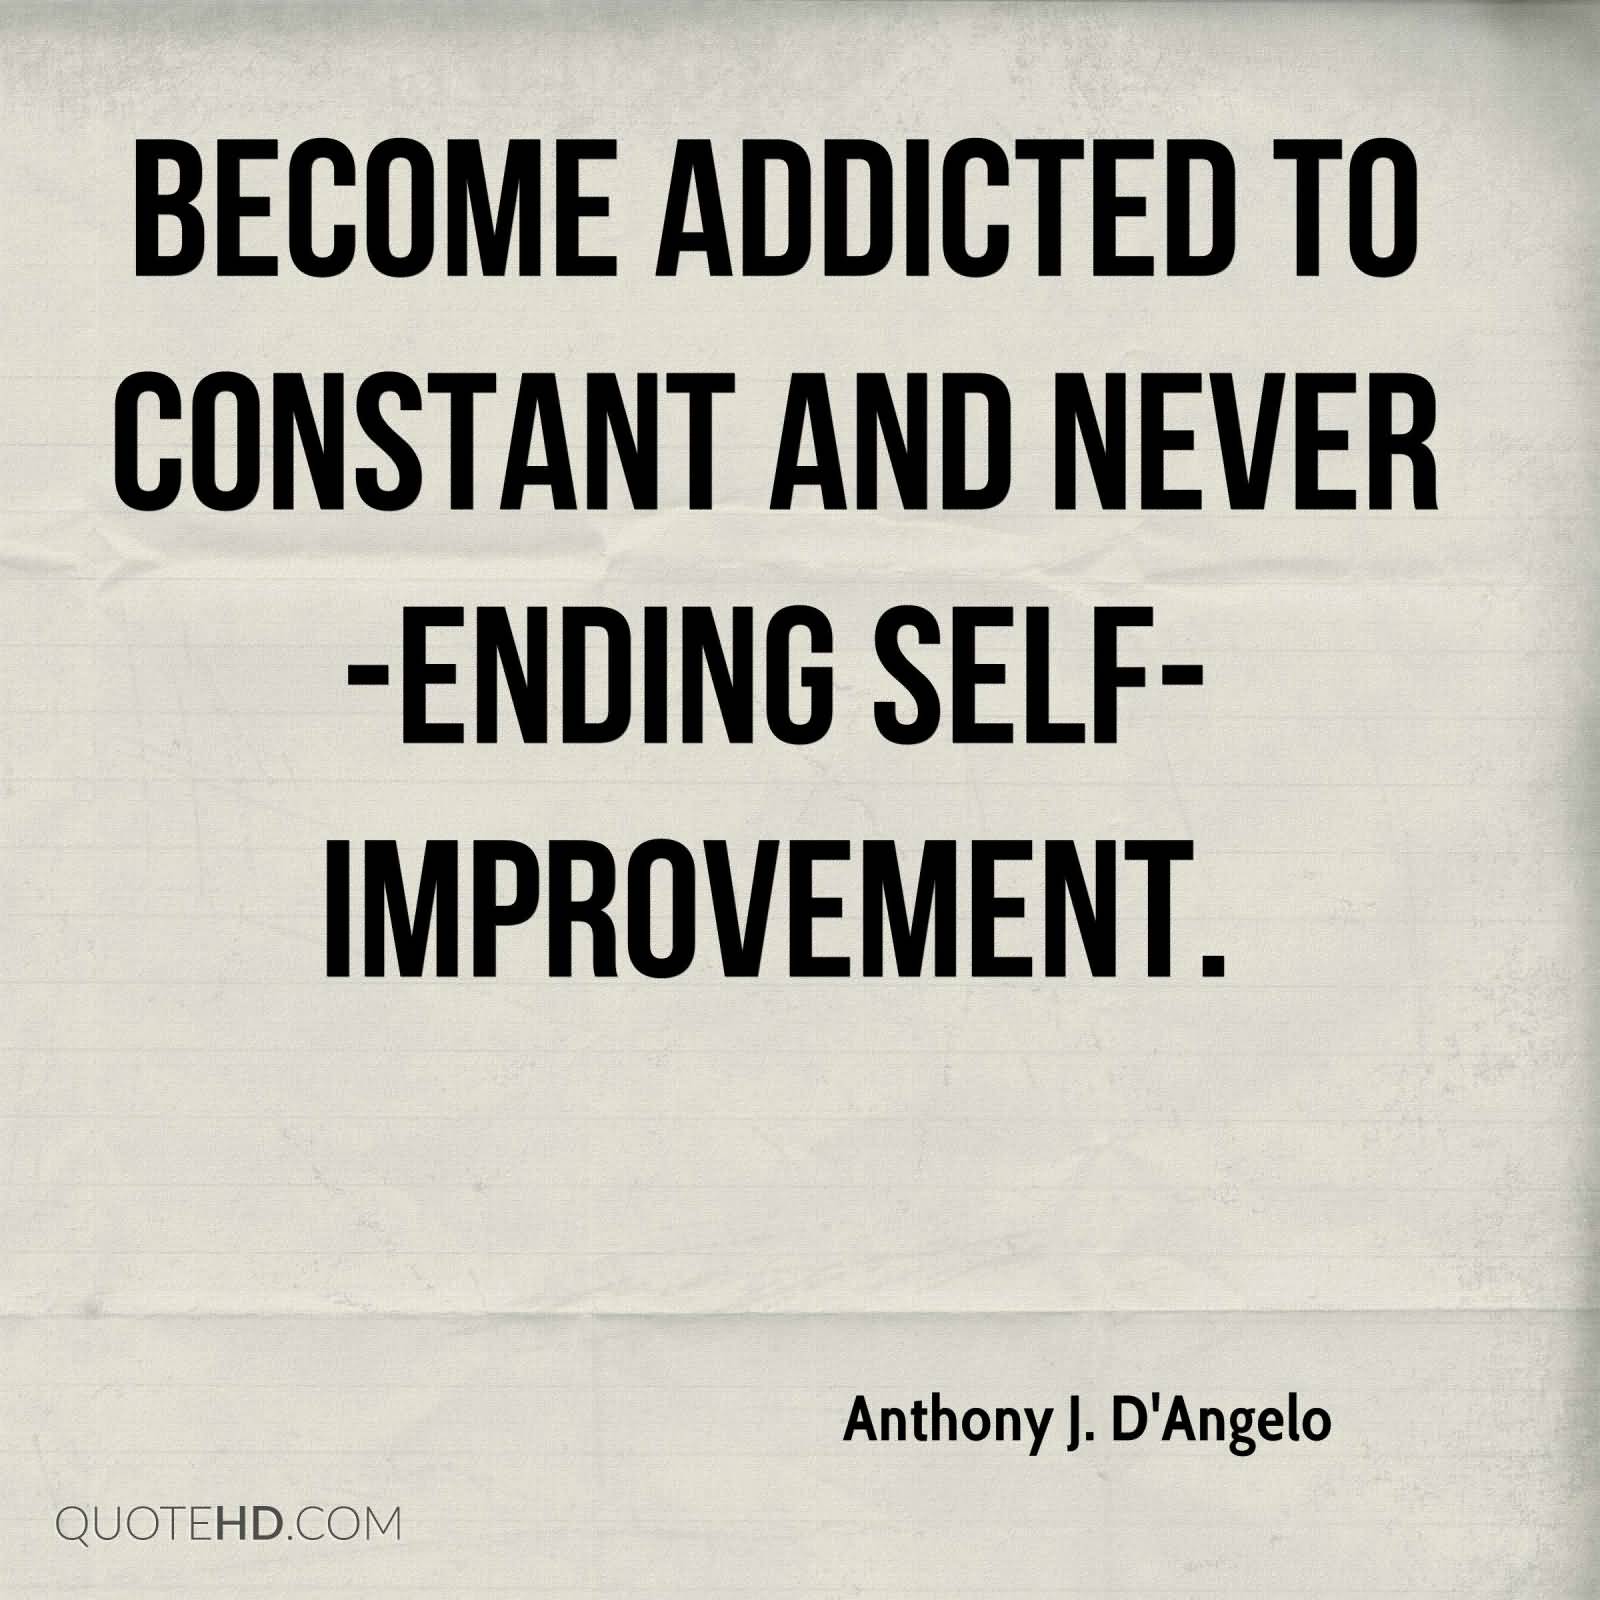 Become addicted to constant and never-ending self improvement. Anthony J. D’Angelo